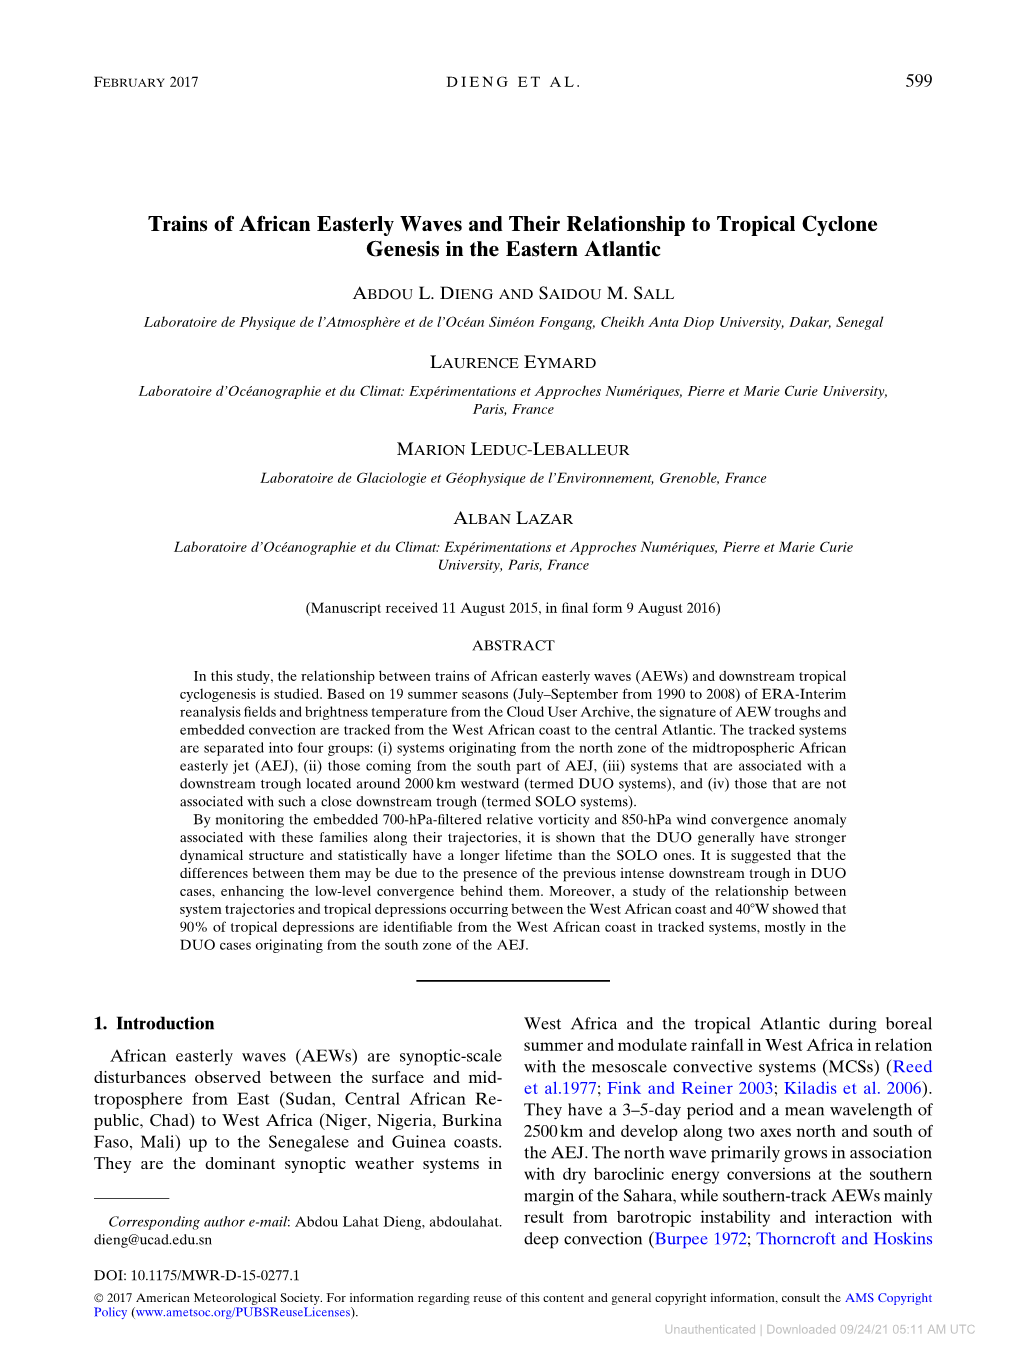 Trains of African Easterly Waves and Their Relationship to Tropical Cyclone Genesis in the Eastern Atlantic